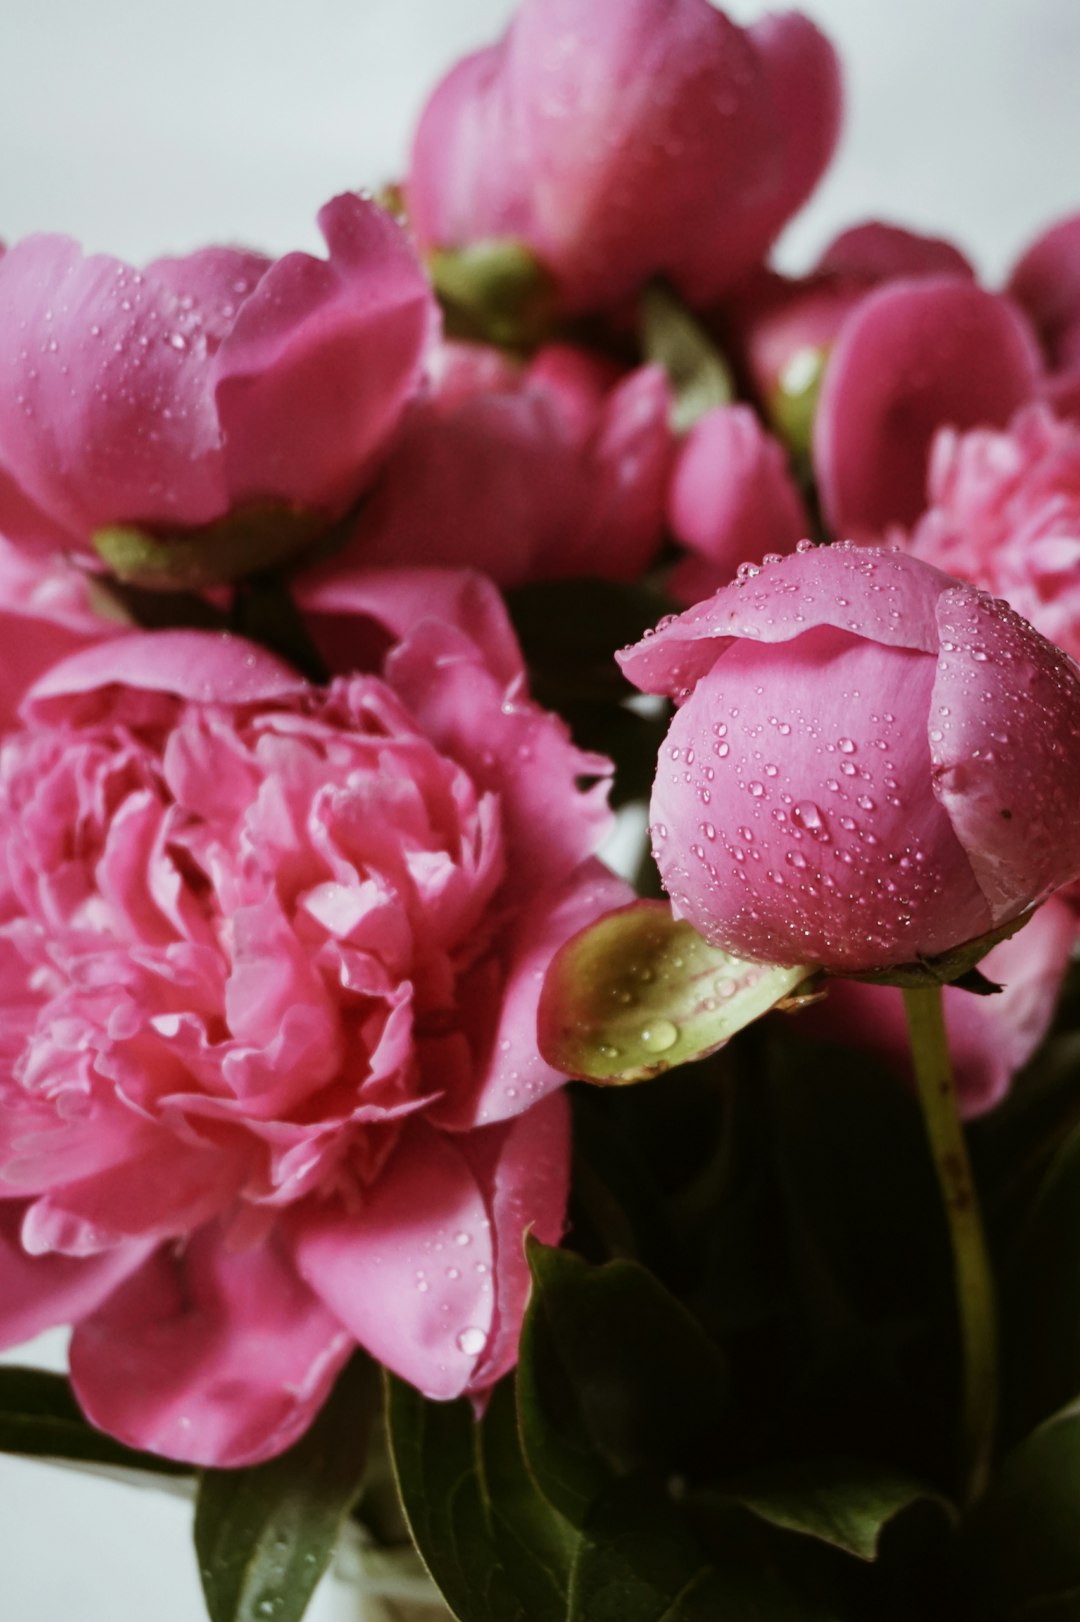 pink petaled flower bloom close-up photography